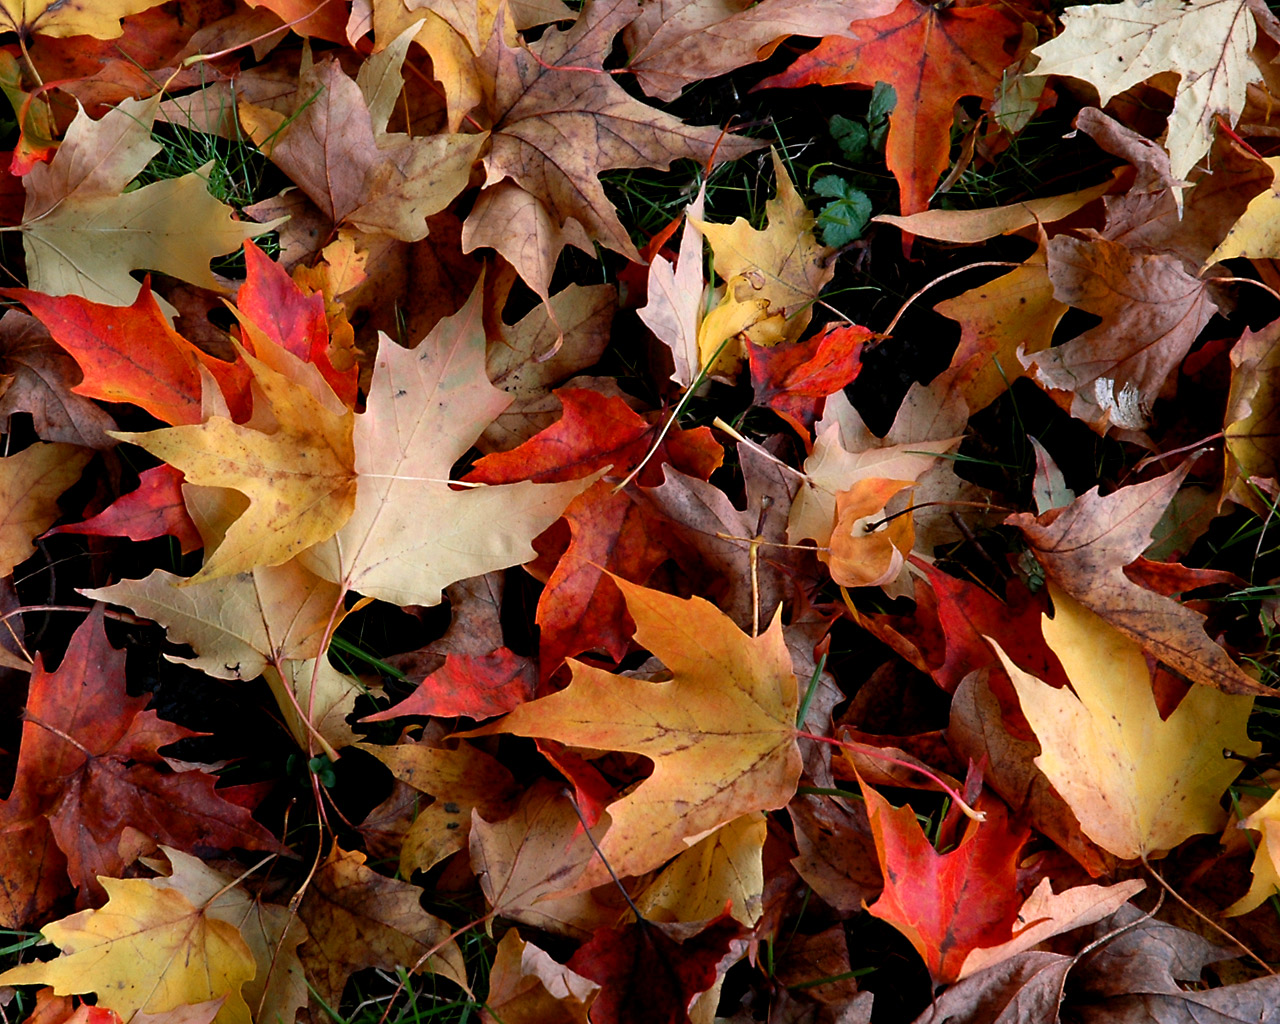  very pretty autumn leaves desktop wallpaper you can download for free